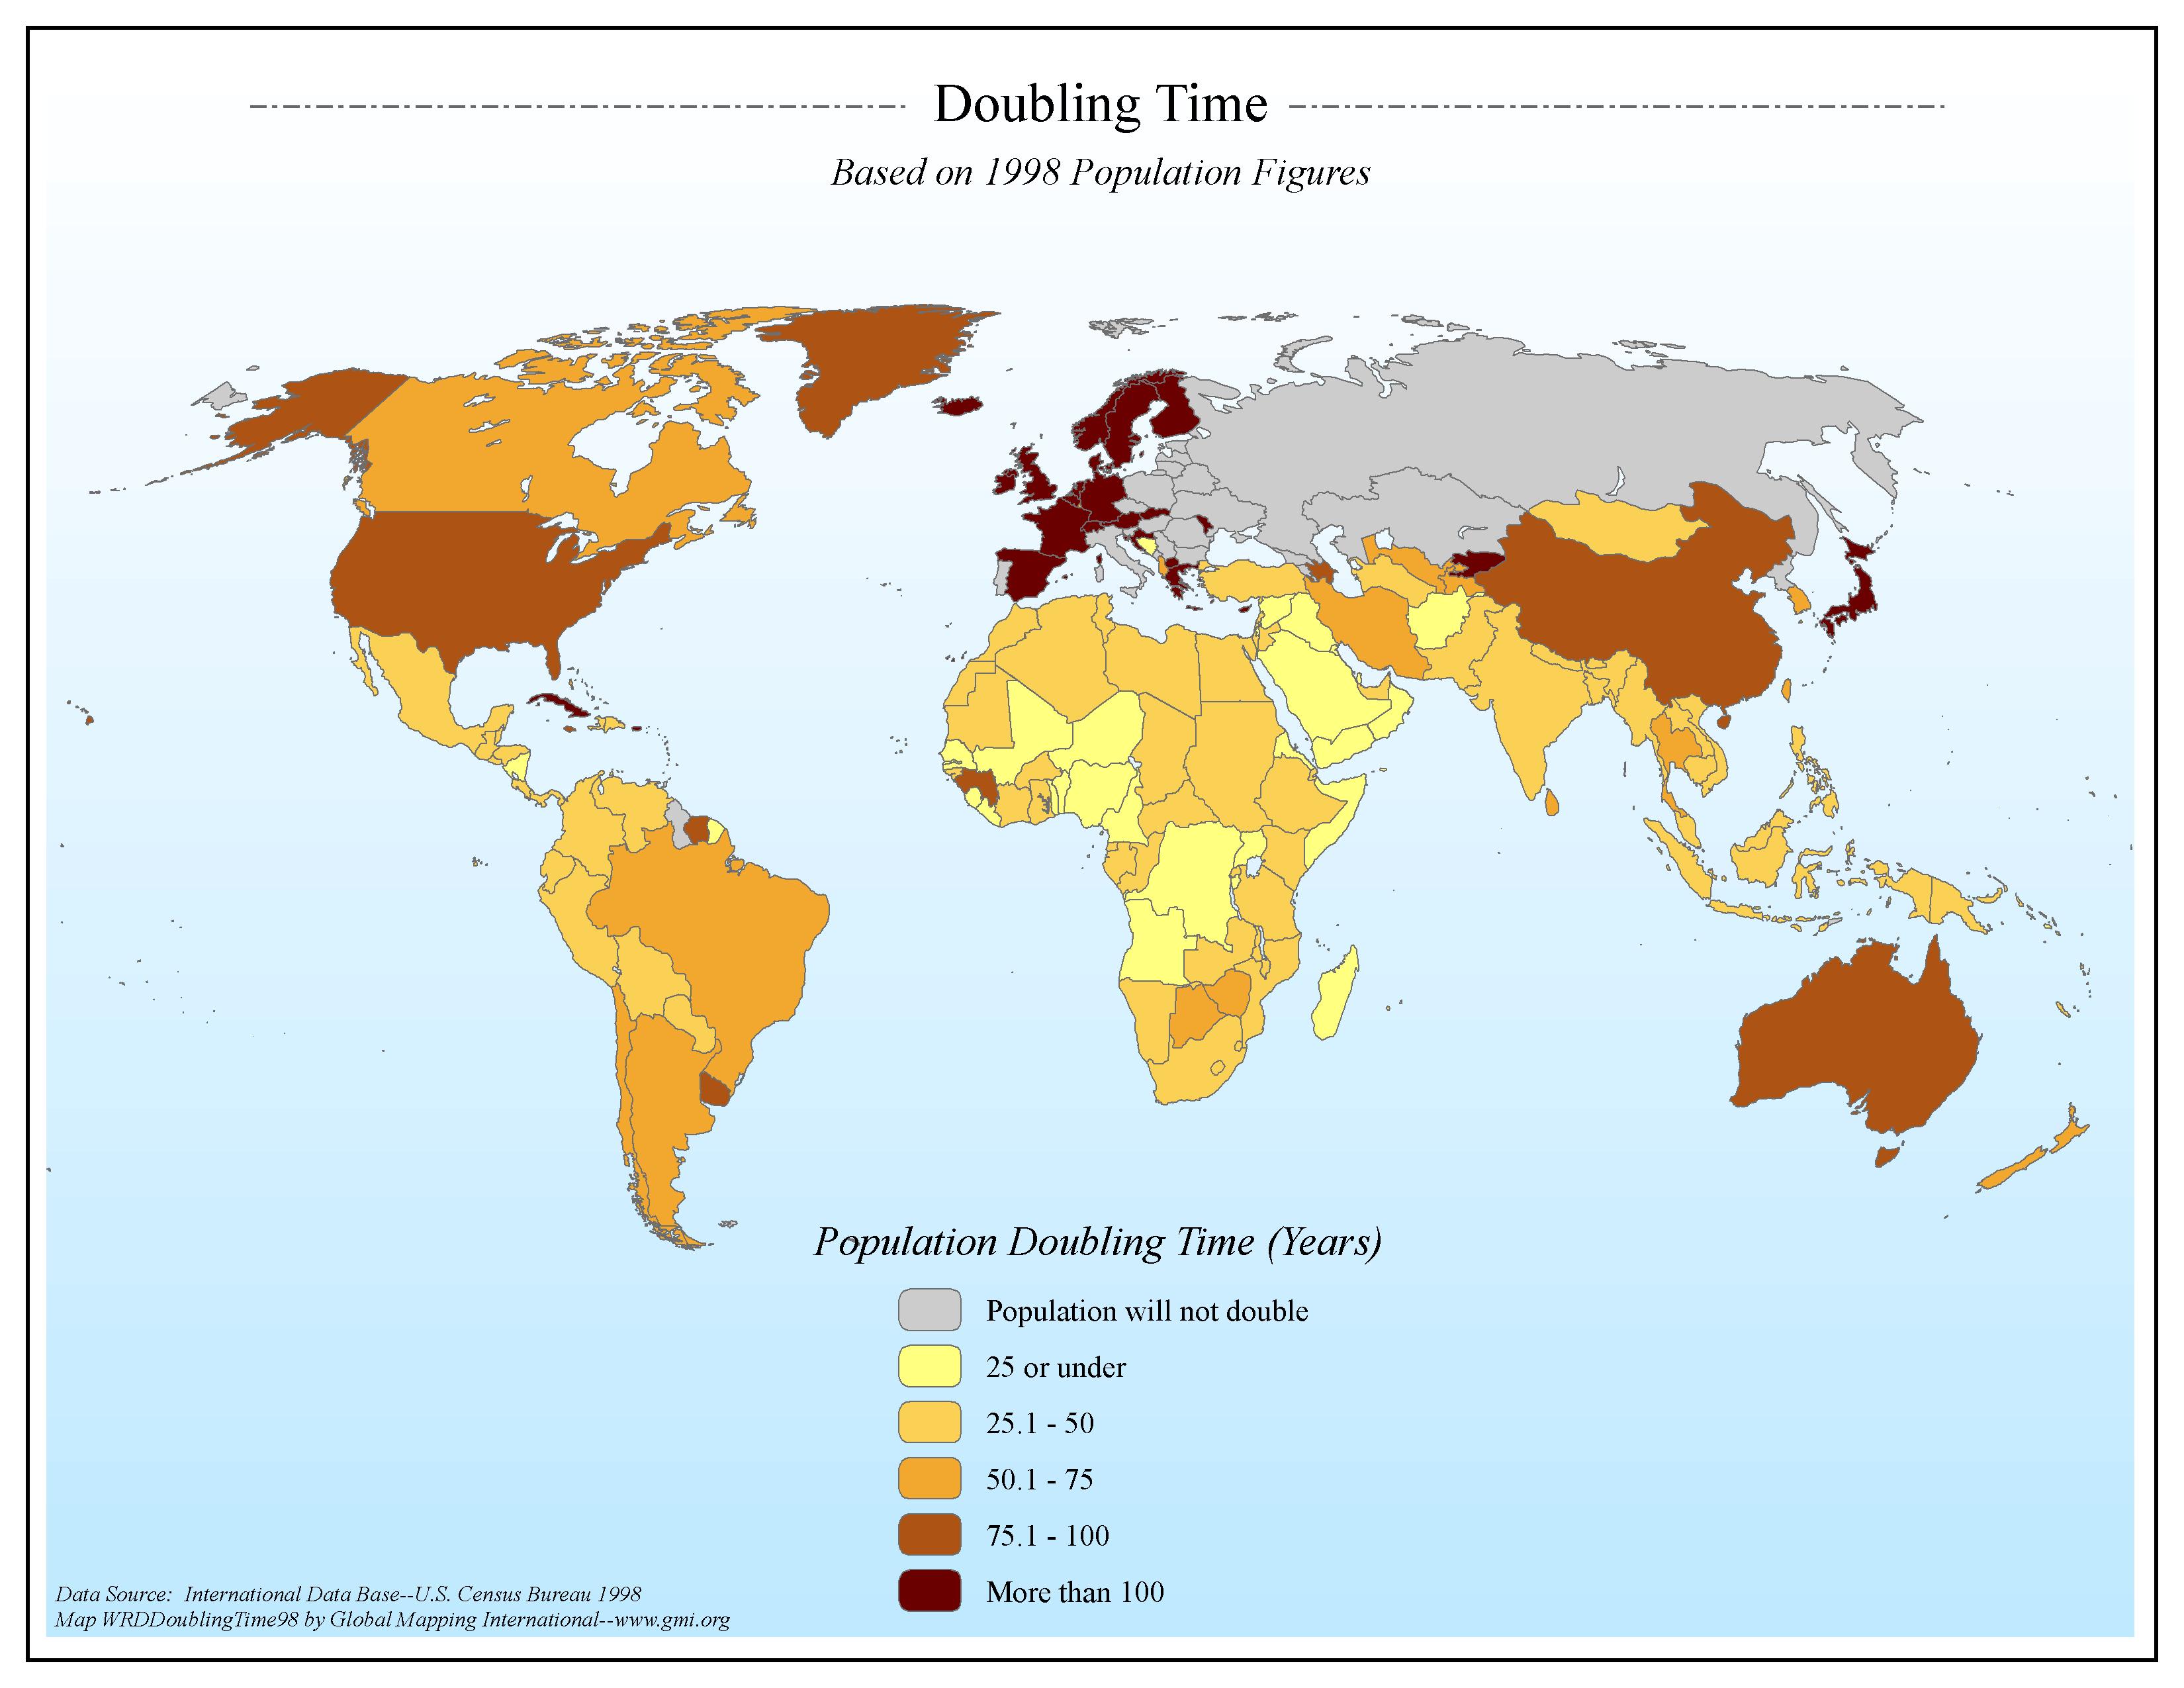 Doubling Time Based on 1998 Population Figures